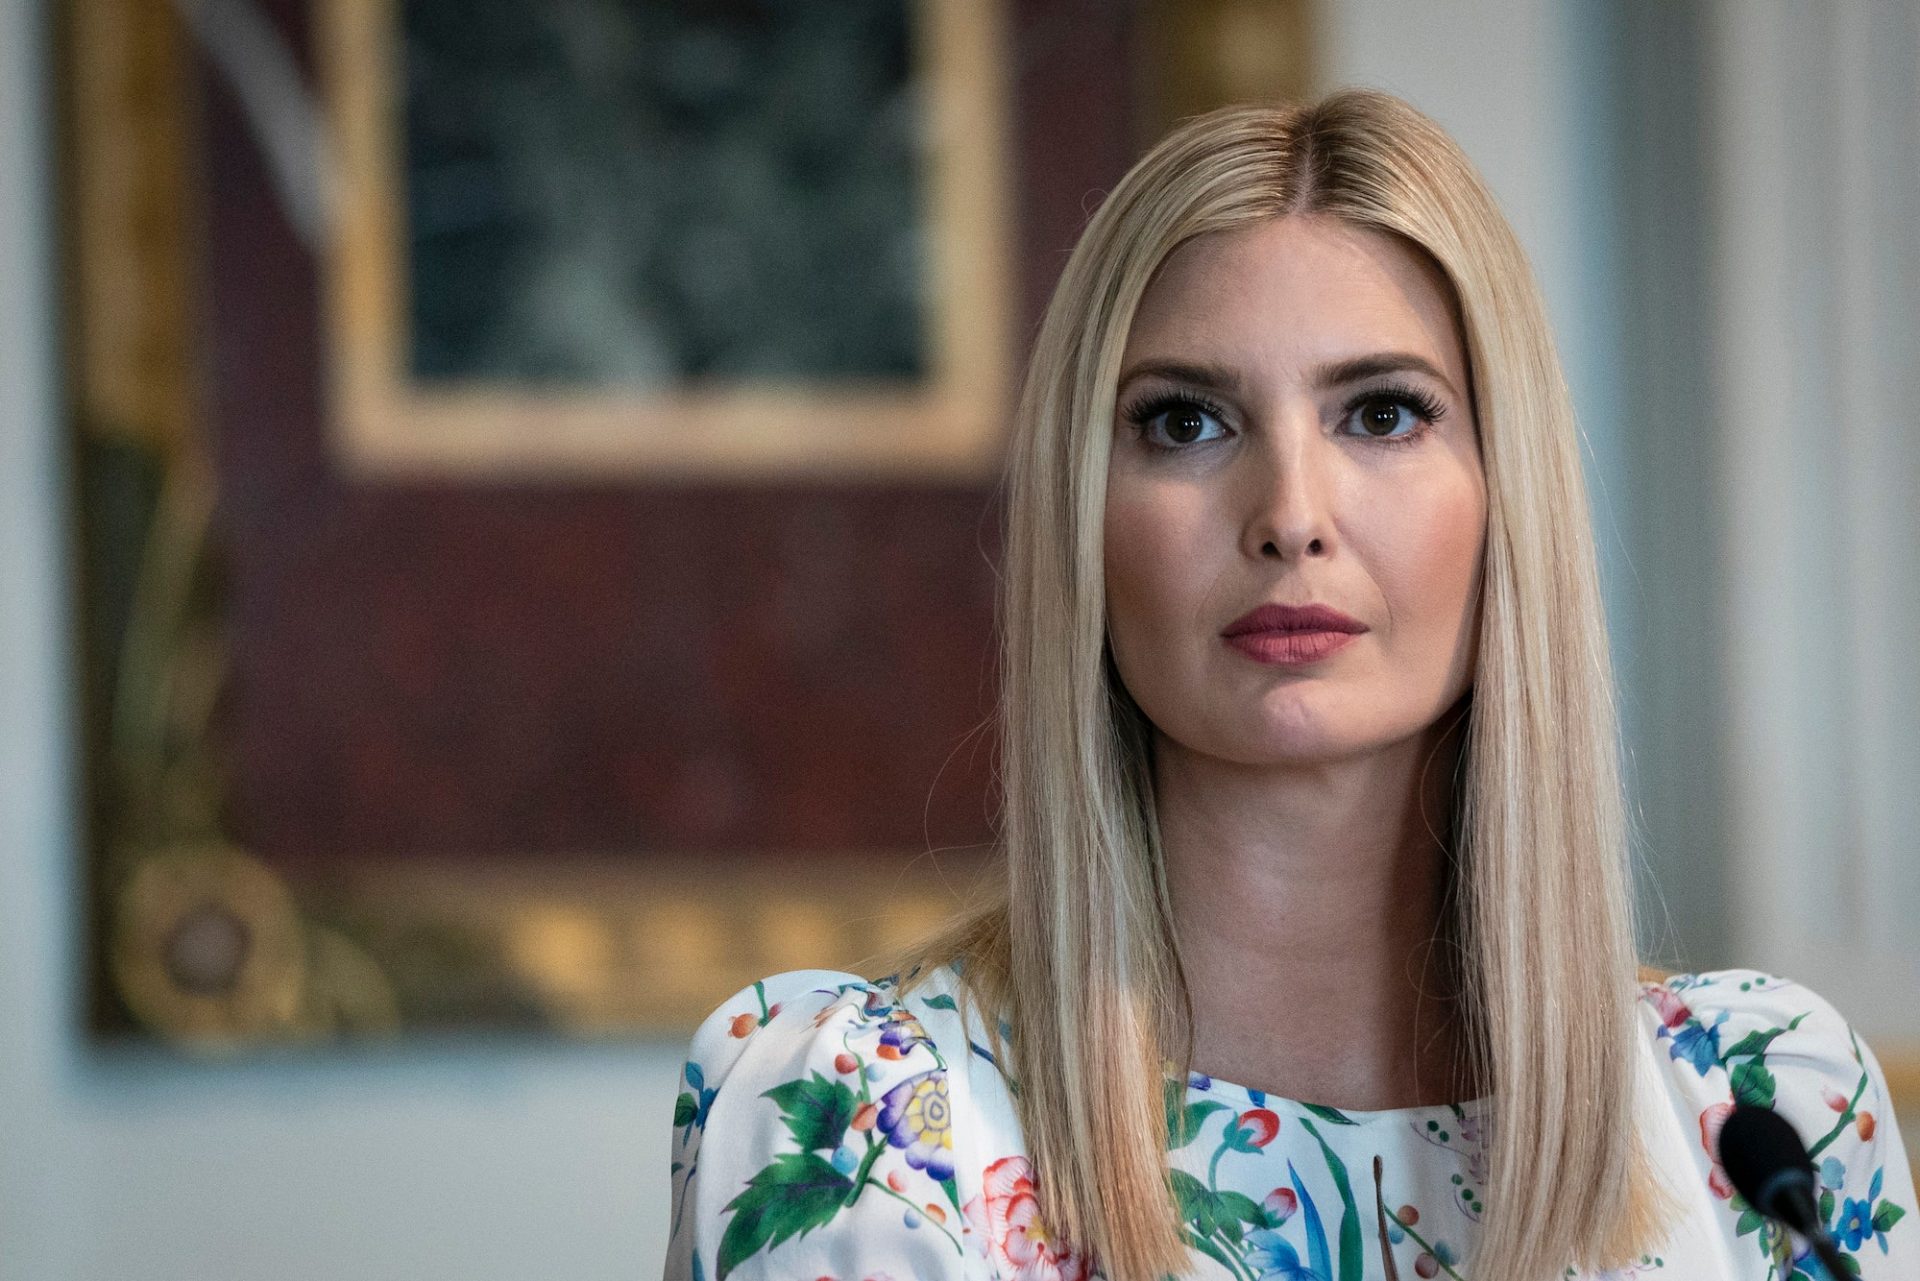 Surprise: Ivanka Trump Became Accountable for Her Father’s Disastrous COVID Address